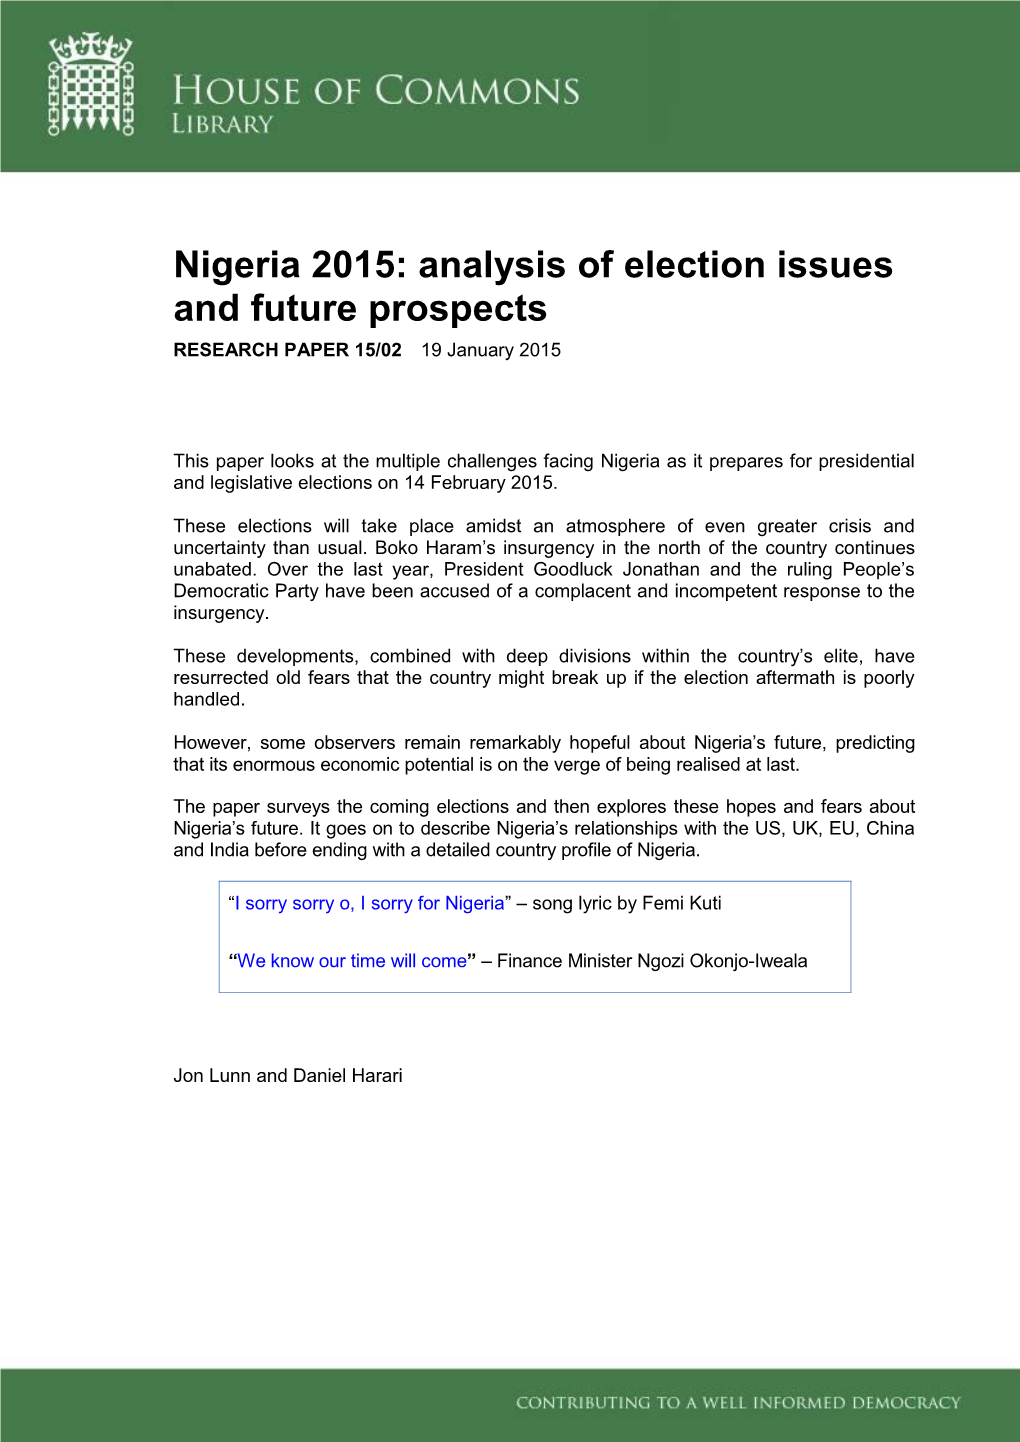 Nigeria 2015: Analysis of Election Issues and Future Prospects RESEARCH PAPER 15/02 19 January 2015